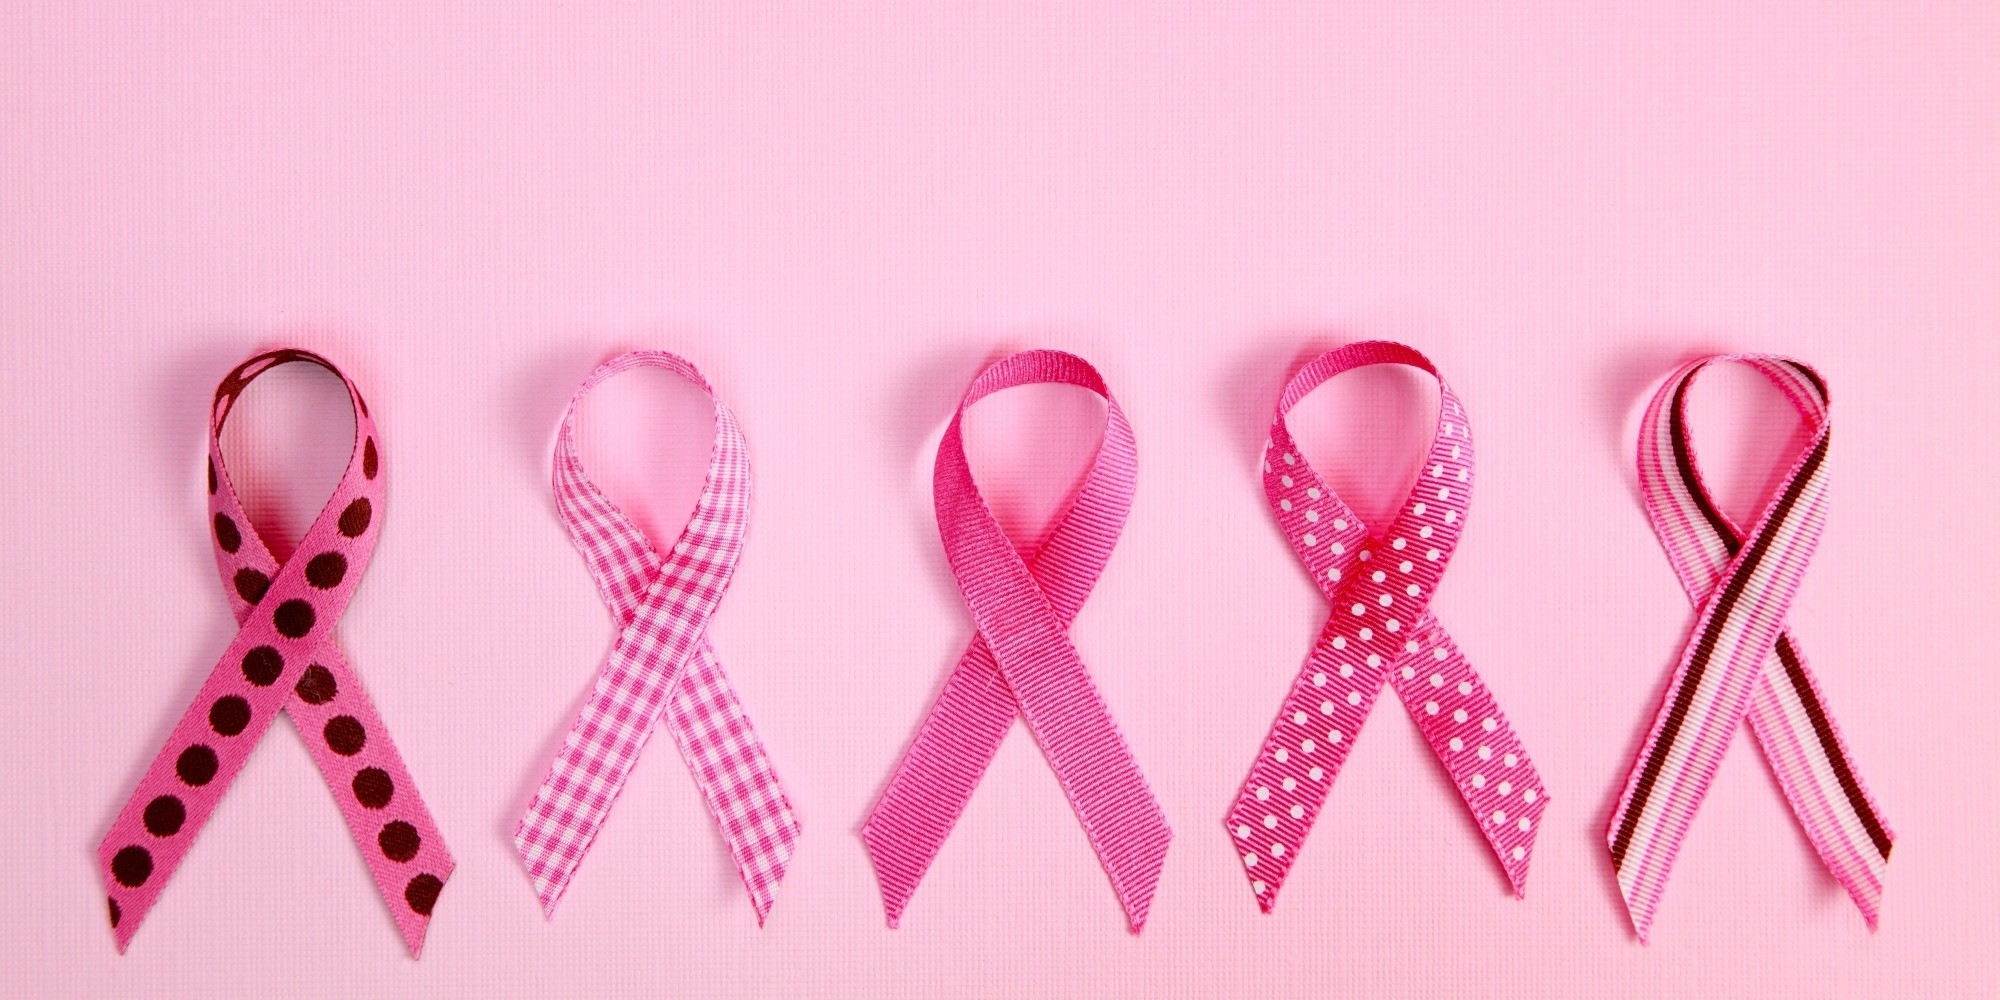 10 Most Popular And Latest Breast Cancer Ribbon Wallpaper for Desktop with ...